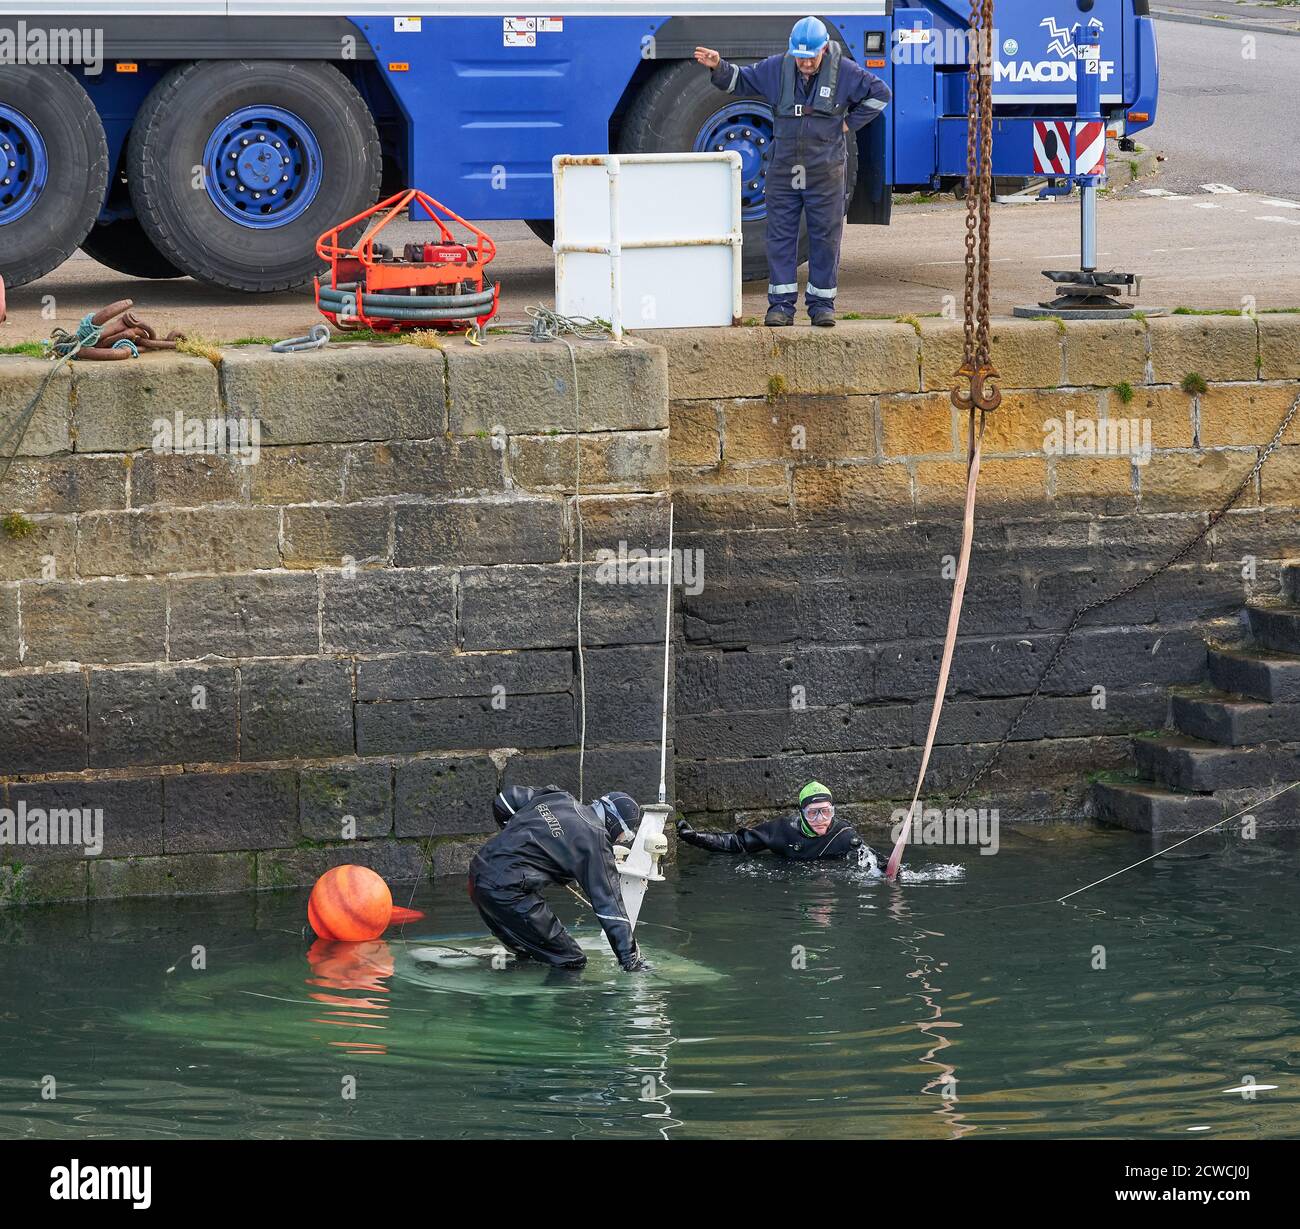 Burghead Harbour, Moray, UK. 29th Sep, 2020. UK. This is the small fishing boat Sula which sank due to a faulty valve system within the Harbour 27/28 Sep. This shows it being recovered from the depths by using a Crane and Divers. Credit: JASPERIMAGE/Alamy Live News Stock Photo